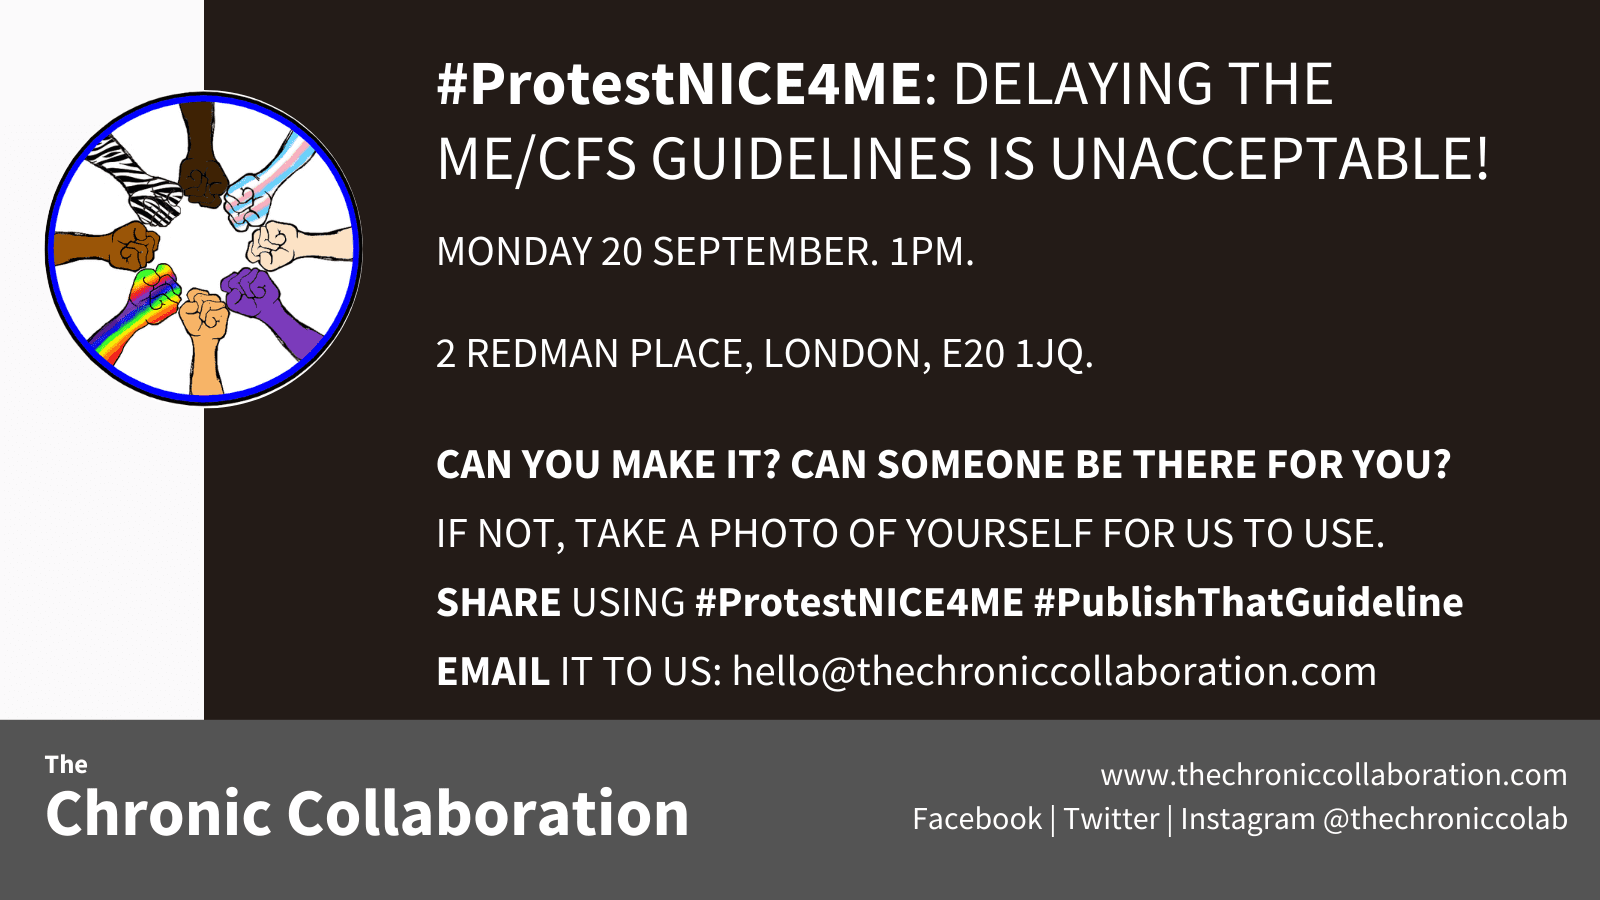 A poster which says the following: #ProtestNICE4ME: DELAYING THE ME/CFS GUIDELINES IS UNACCEPTABLE! MONDAY 20 SEPTEMBER. 1PM. 2 REDMAN PLACE, LONDON, E20 1JQ. CAN YOU MAKE IT? CAN SOMEONE BE THERE FOR YOU? IF NOT, TAKE A PHOTO OF YOURSELF FOR US TO USE. SHARE USING #ProtestNICE4ME #PublishThatGuideline EMAIL IT TO US: hello@thechroniccollaboration.com 